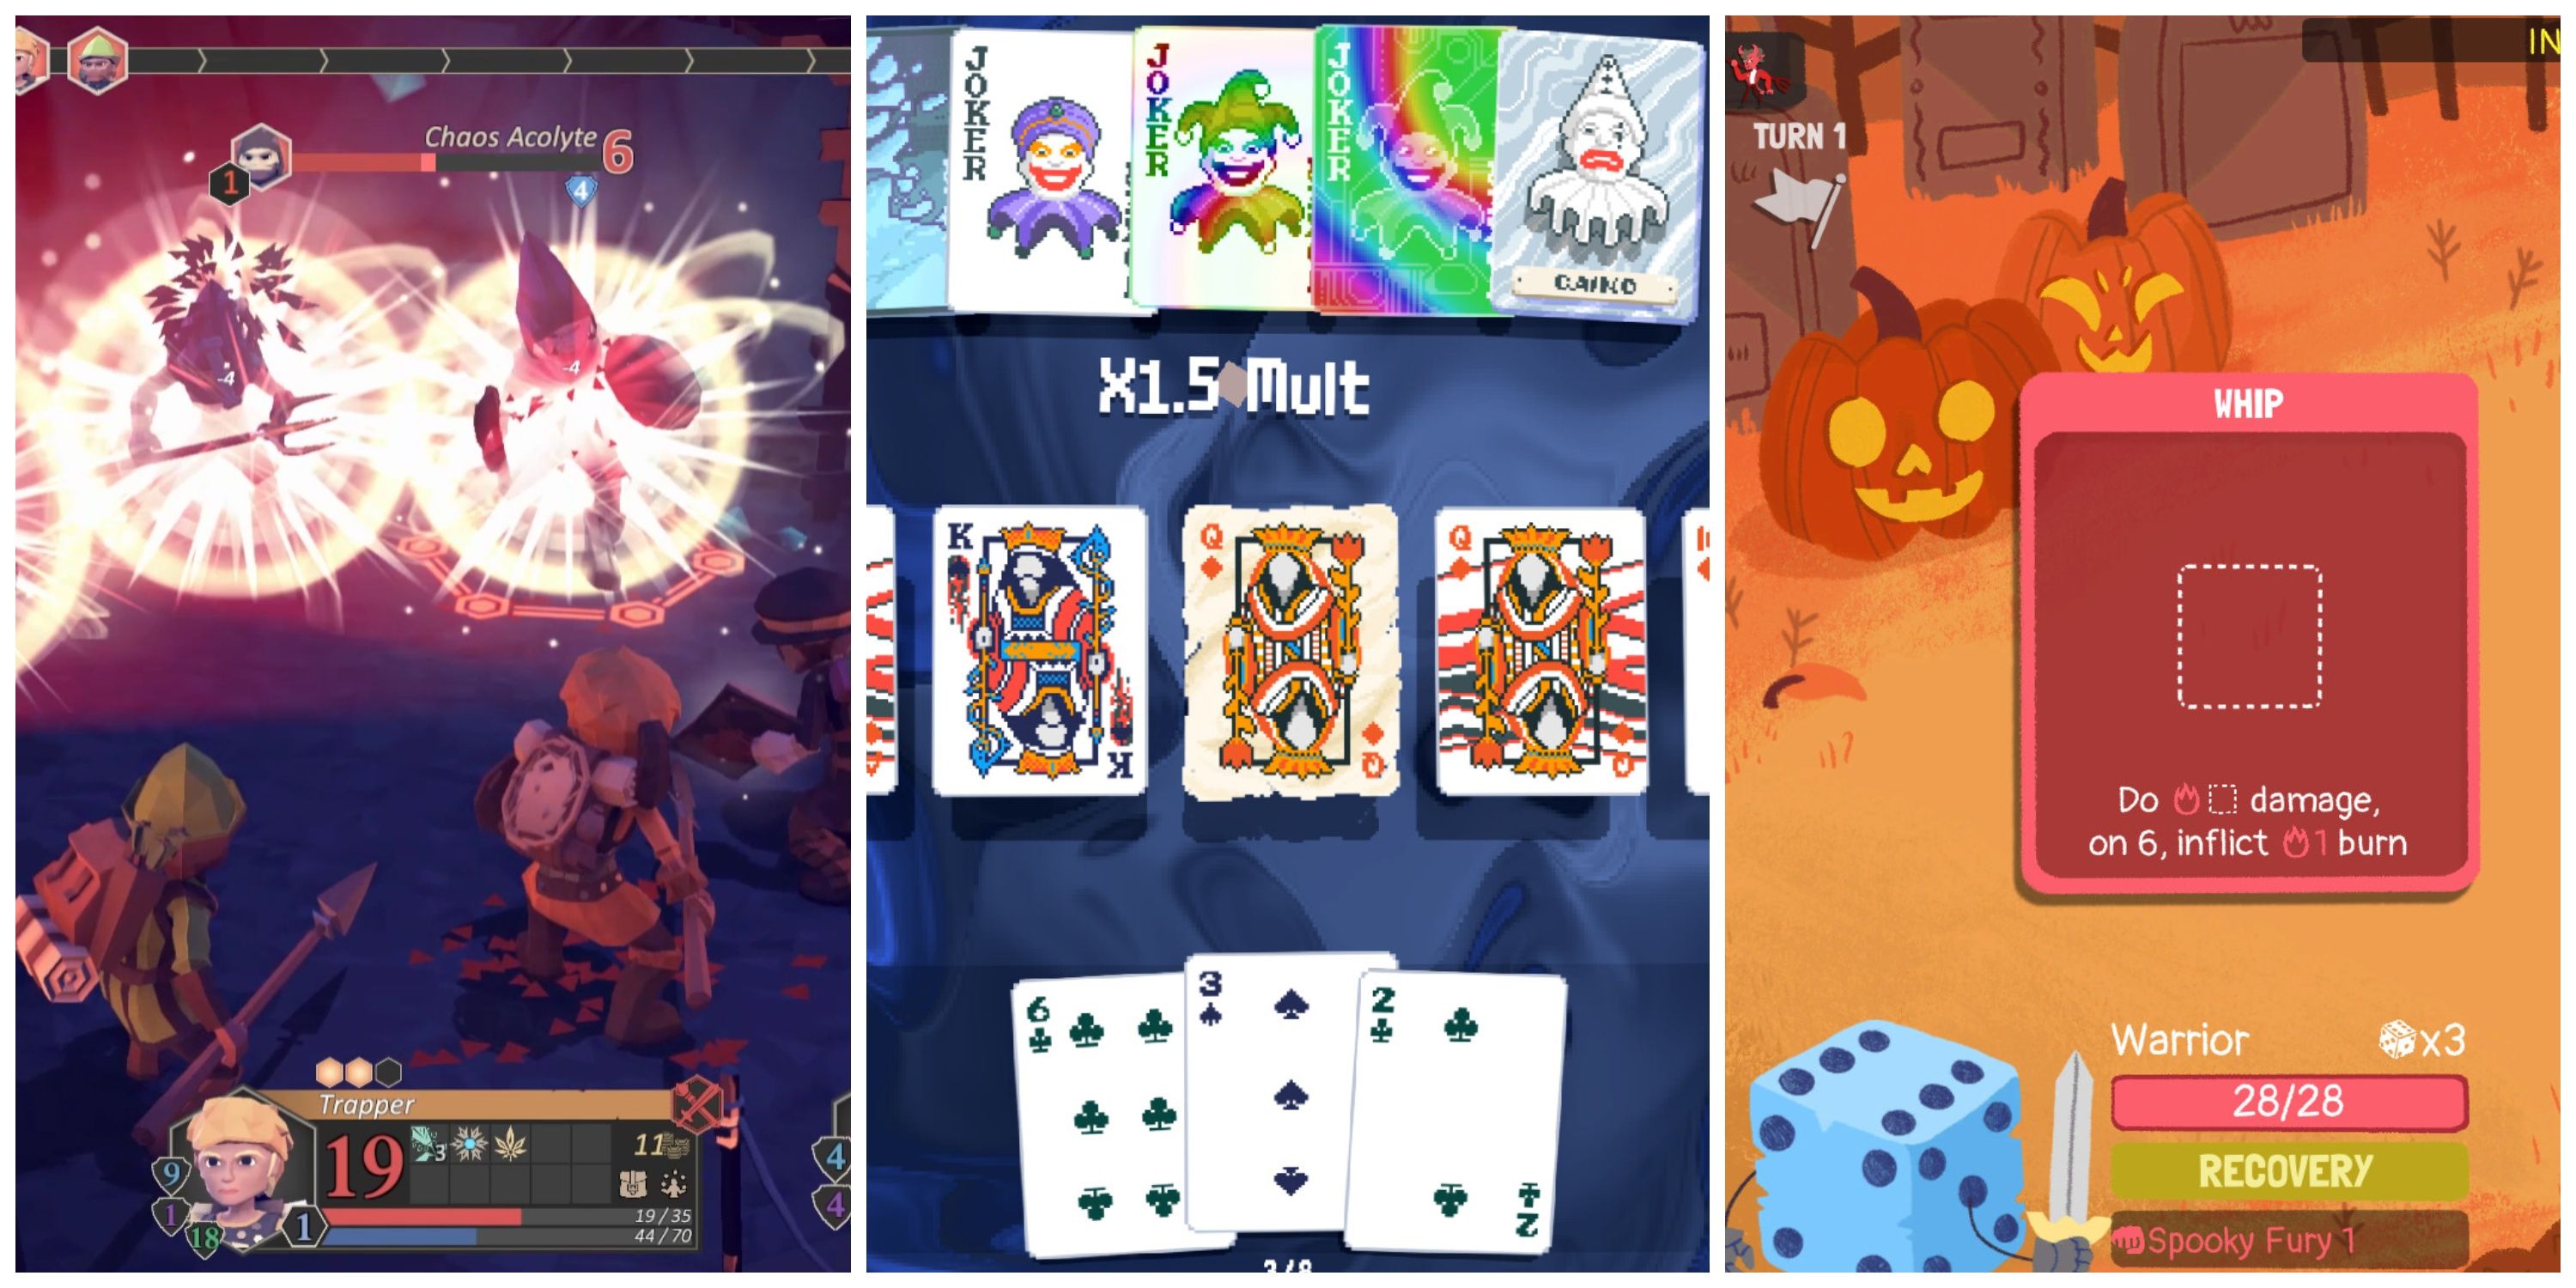 Strategy Games That Use Randomness Well (Featured Image) - For The King + Balatro + Dicey Dungeons